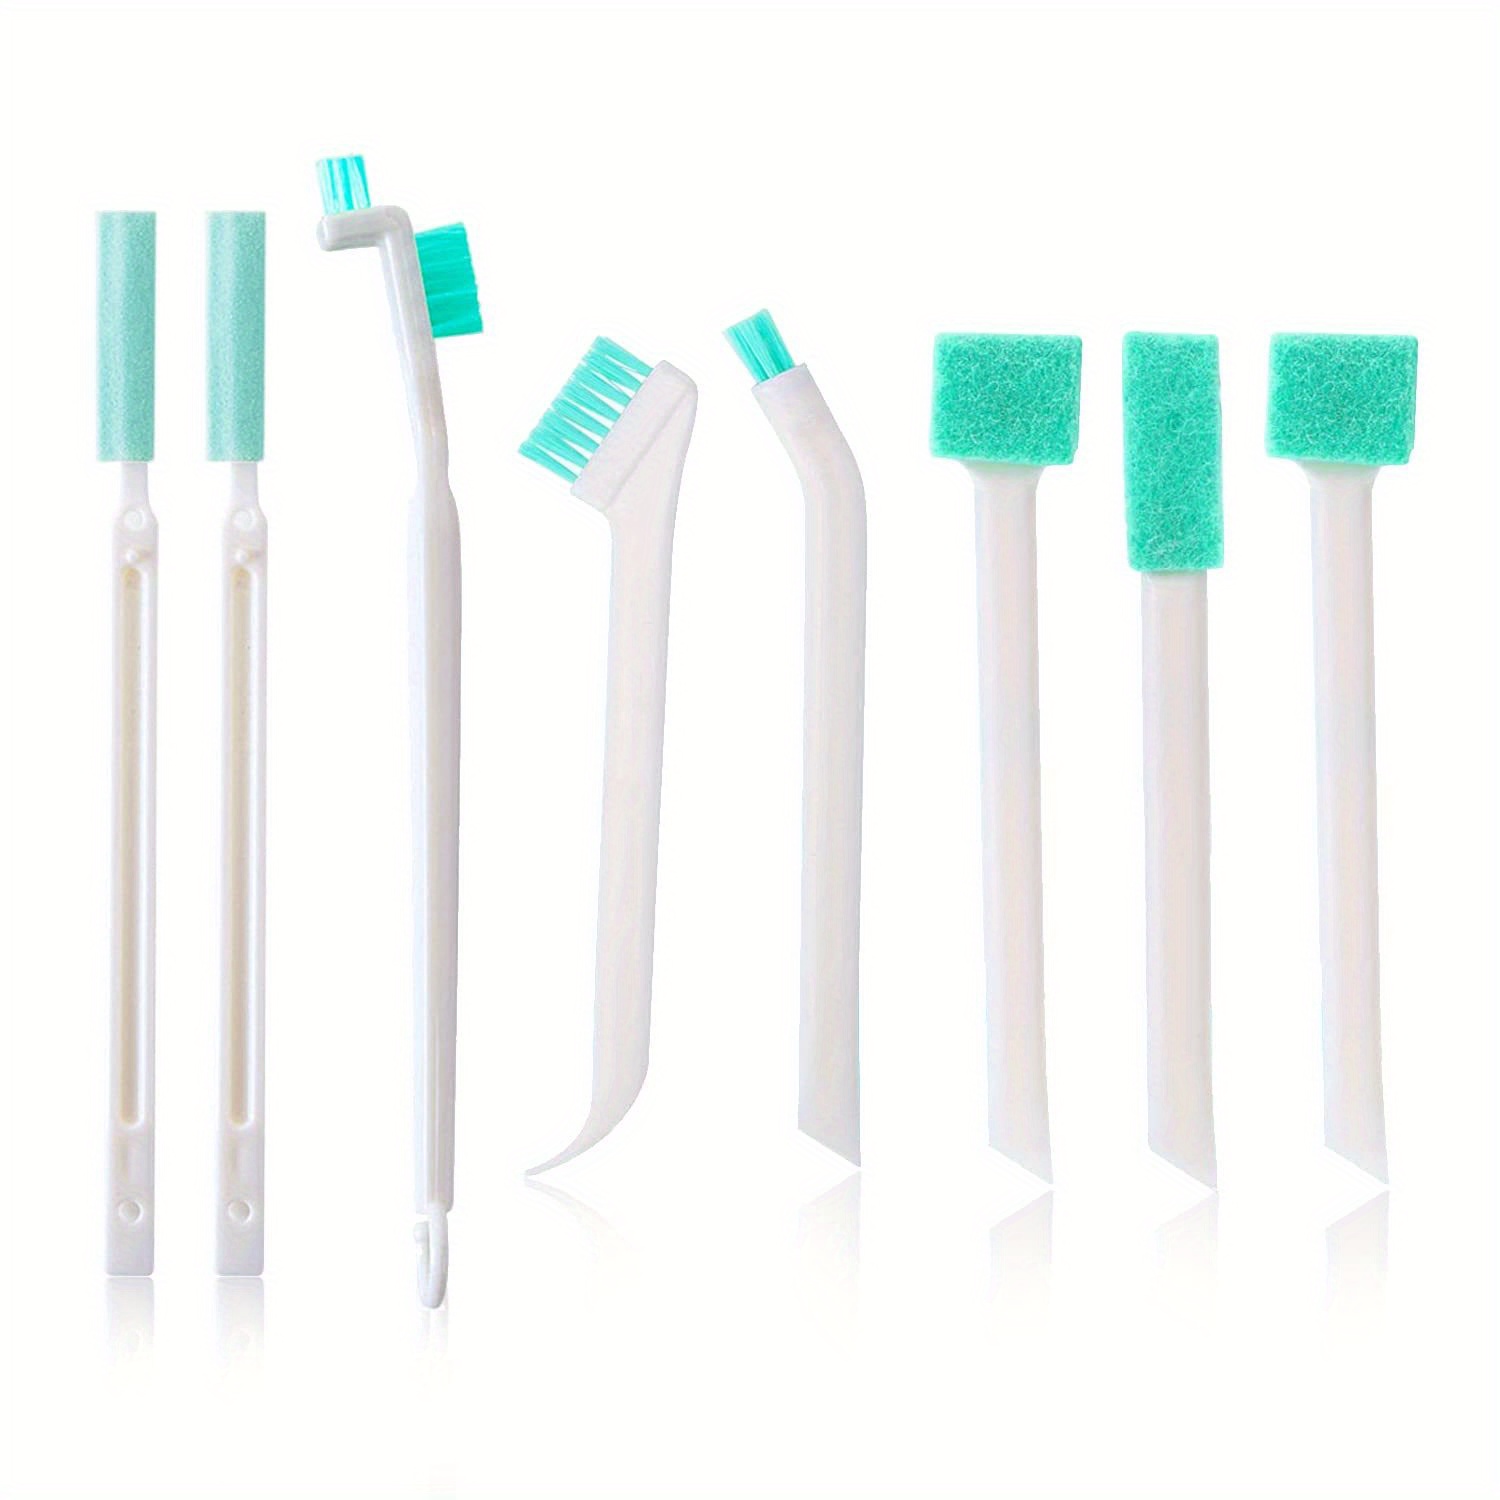 Disposable Crevice Cleaning Brush, Crevice Hole Brush Skinny Gap